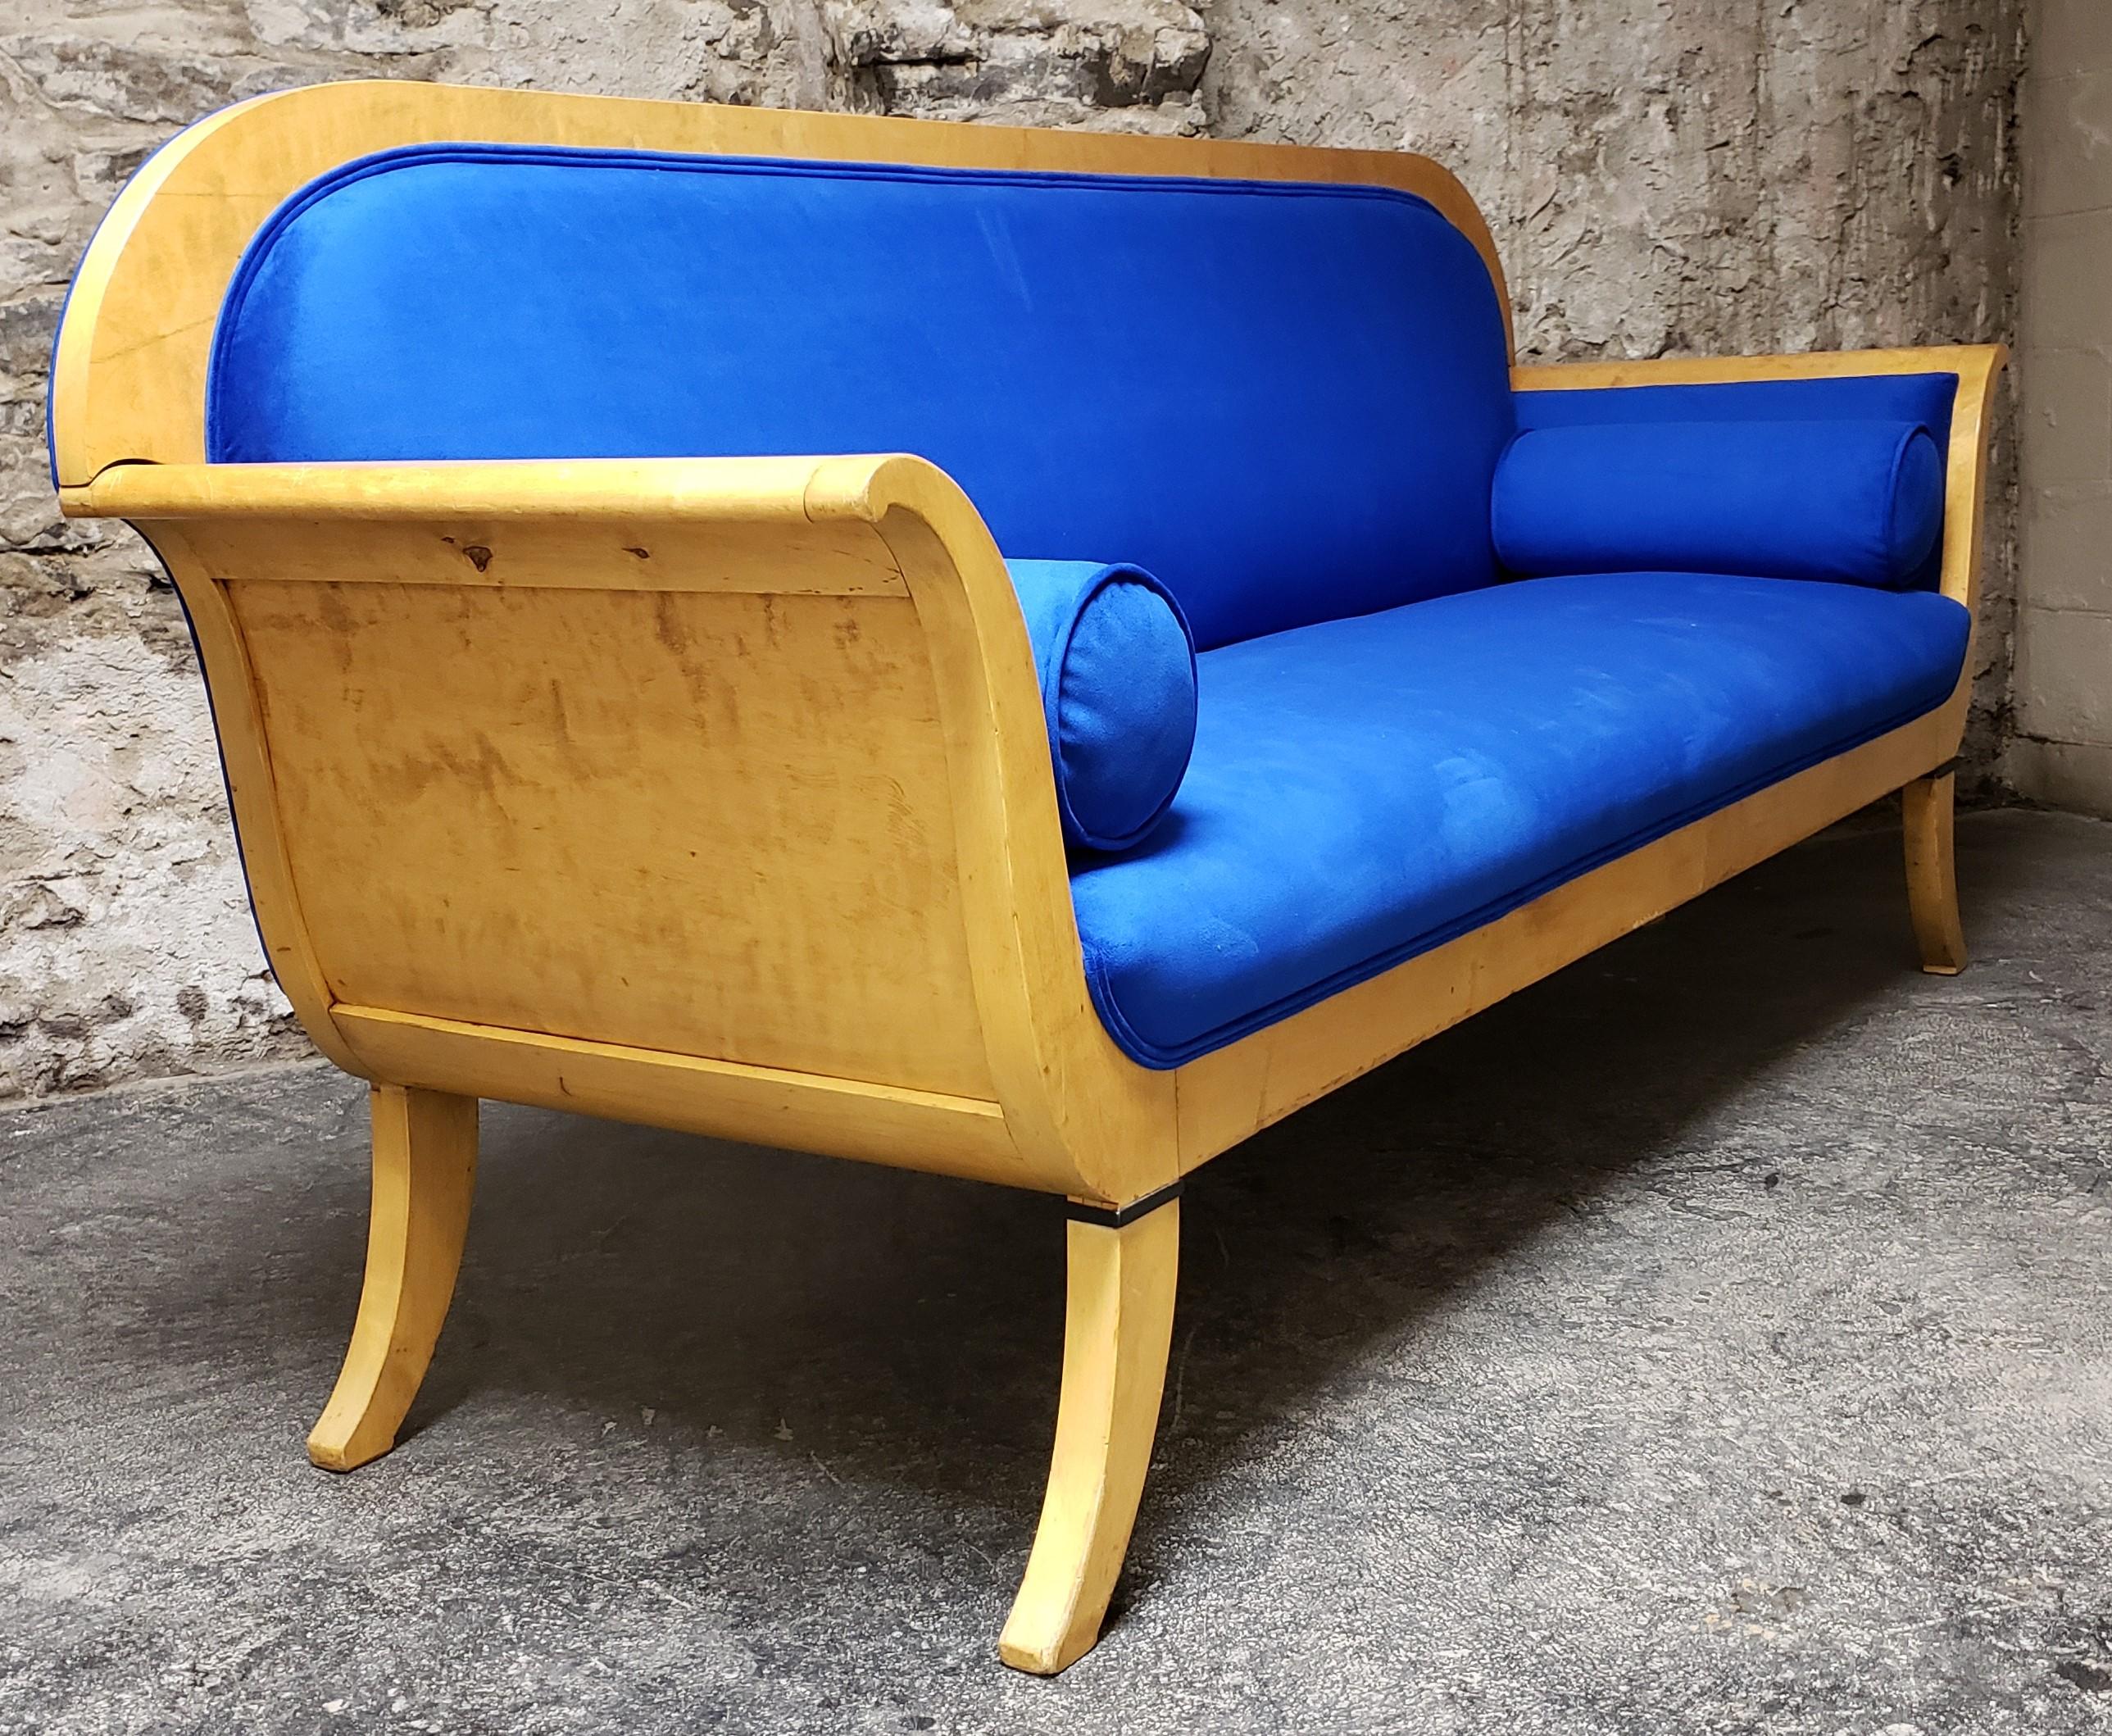 A Karl Johann style Swedish Biedermeier satinwood sofa, circa 1830. This antique yet Minimalist designed sofa is freshly upholstered in a handsome royal blue velvet with two custom rolled pillows. Because the sofa is deep it is extremely comfortable